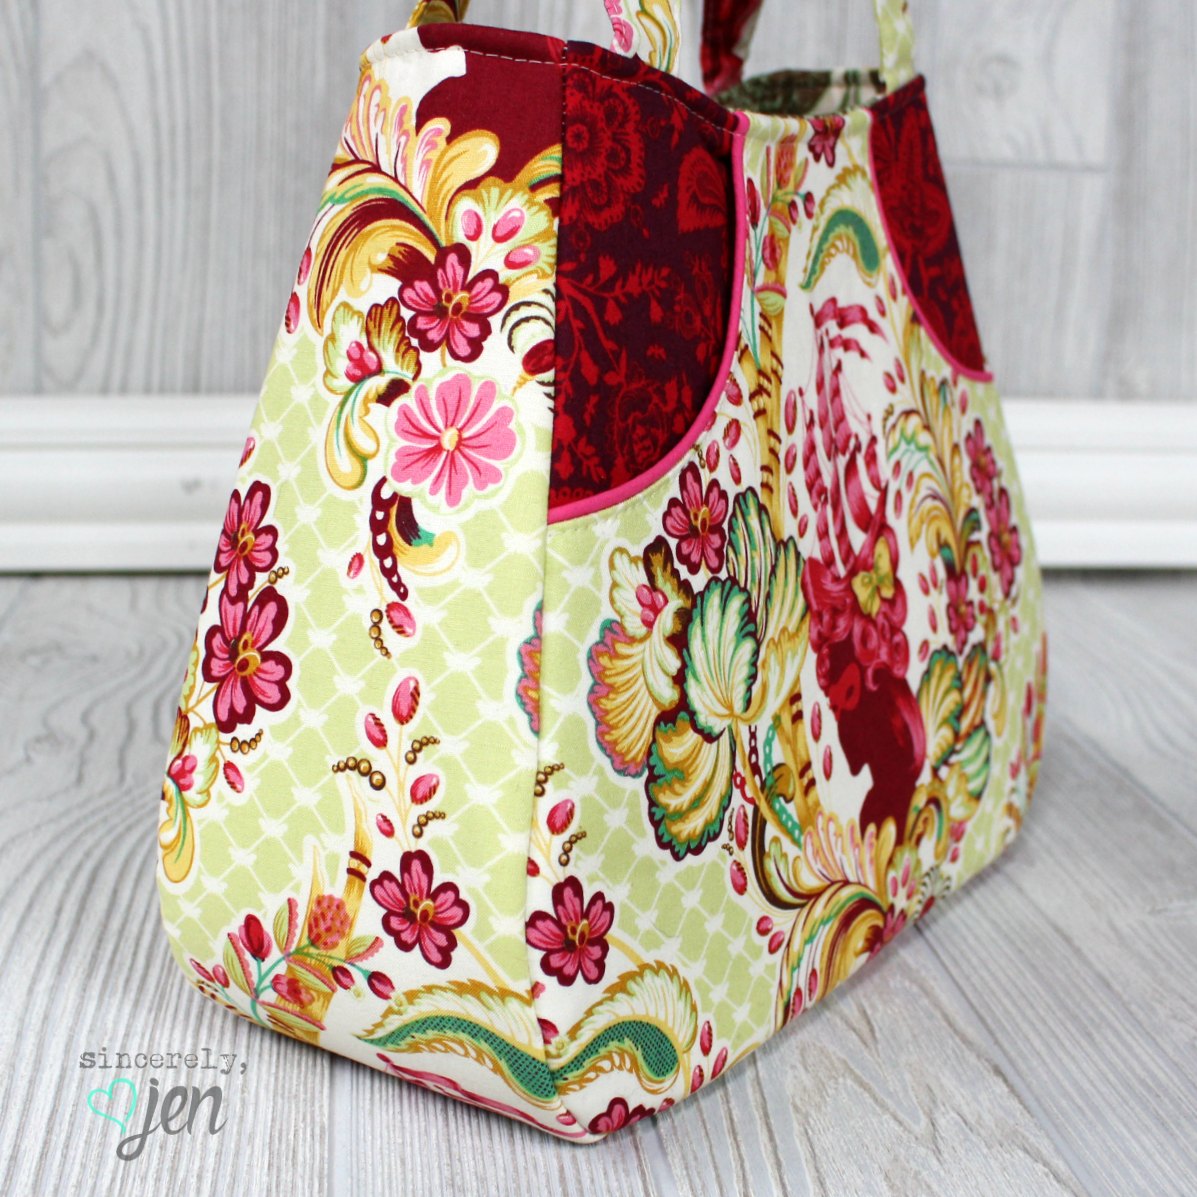 Sincerely Jen: Adding Front Pockets to Swoon's Ethel Tote - A Tutorial